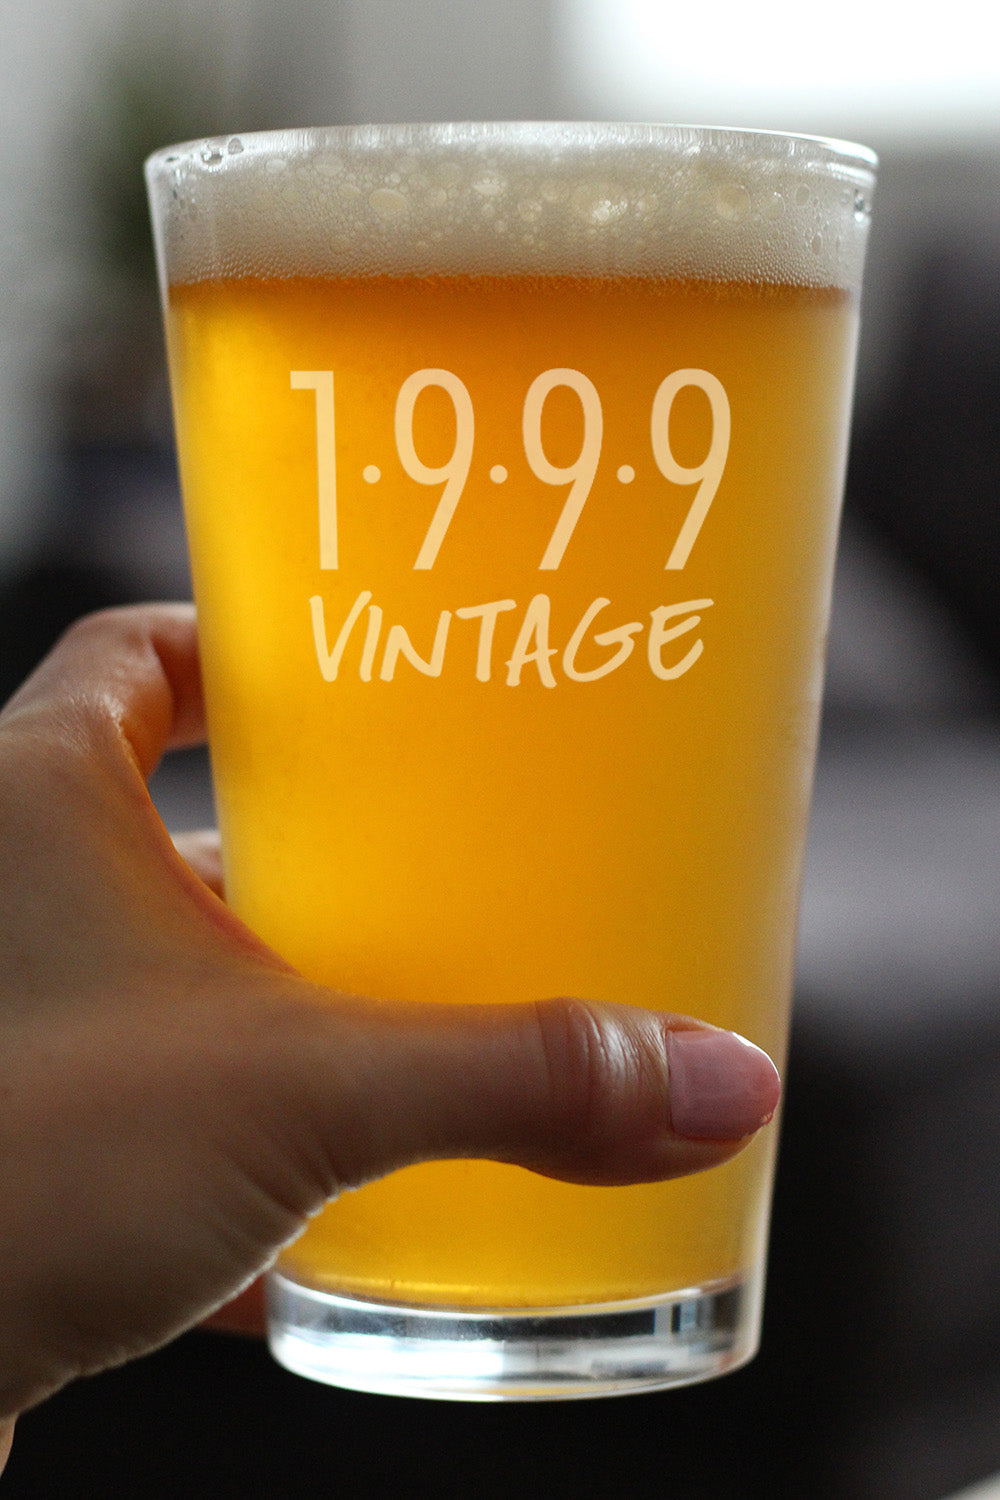 Vintage 1999 - Pint Glass for Beer - 24th Birthday Gifts for Men or Women Turning 24 - Fun Bday Party Decor - 16 oz